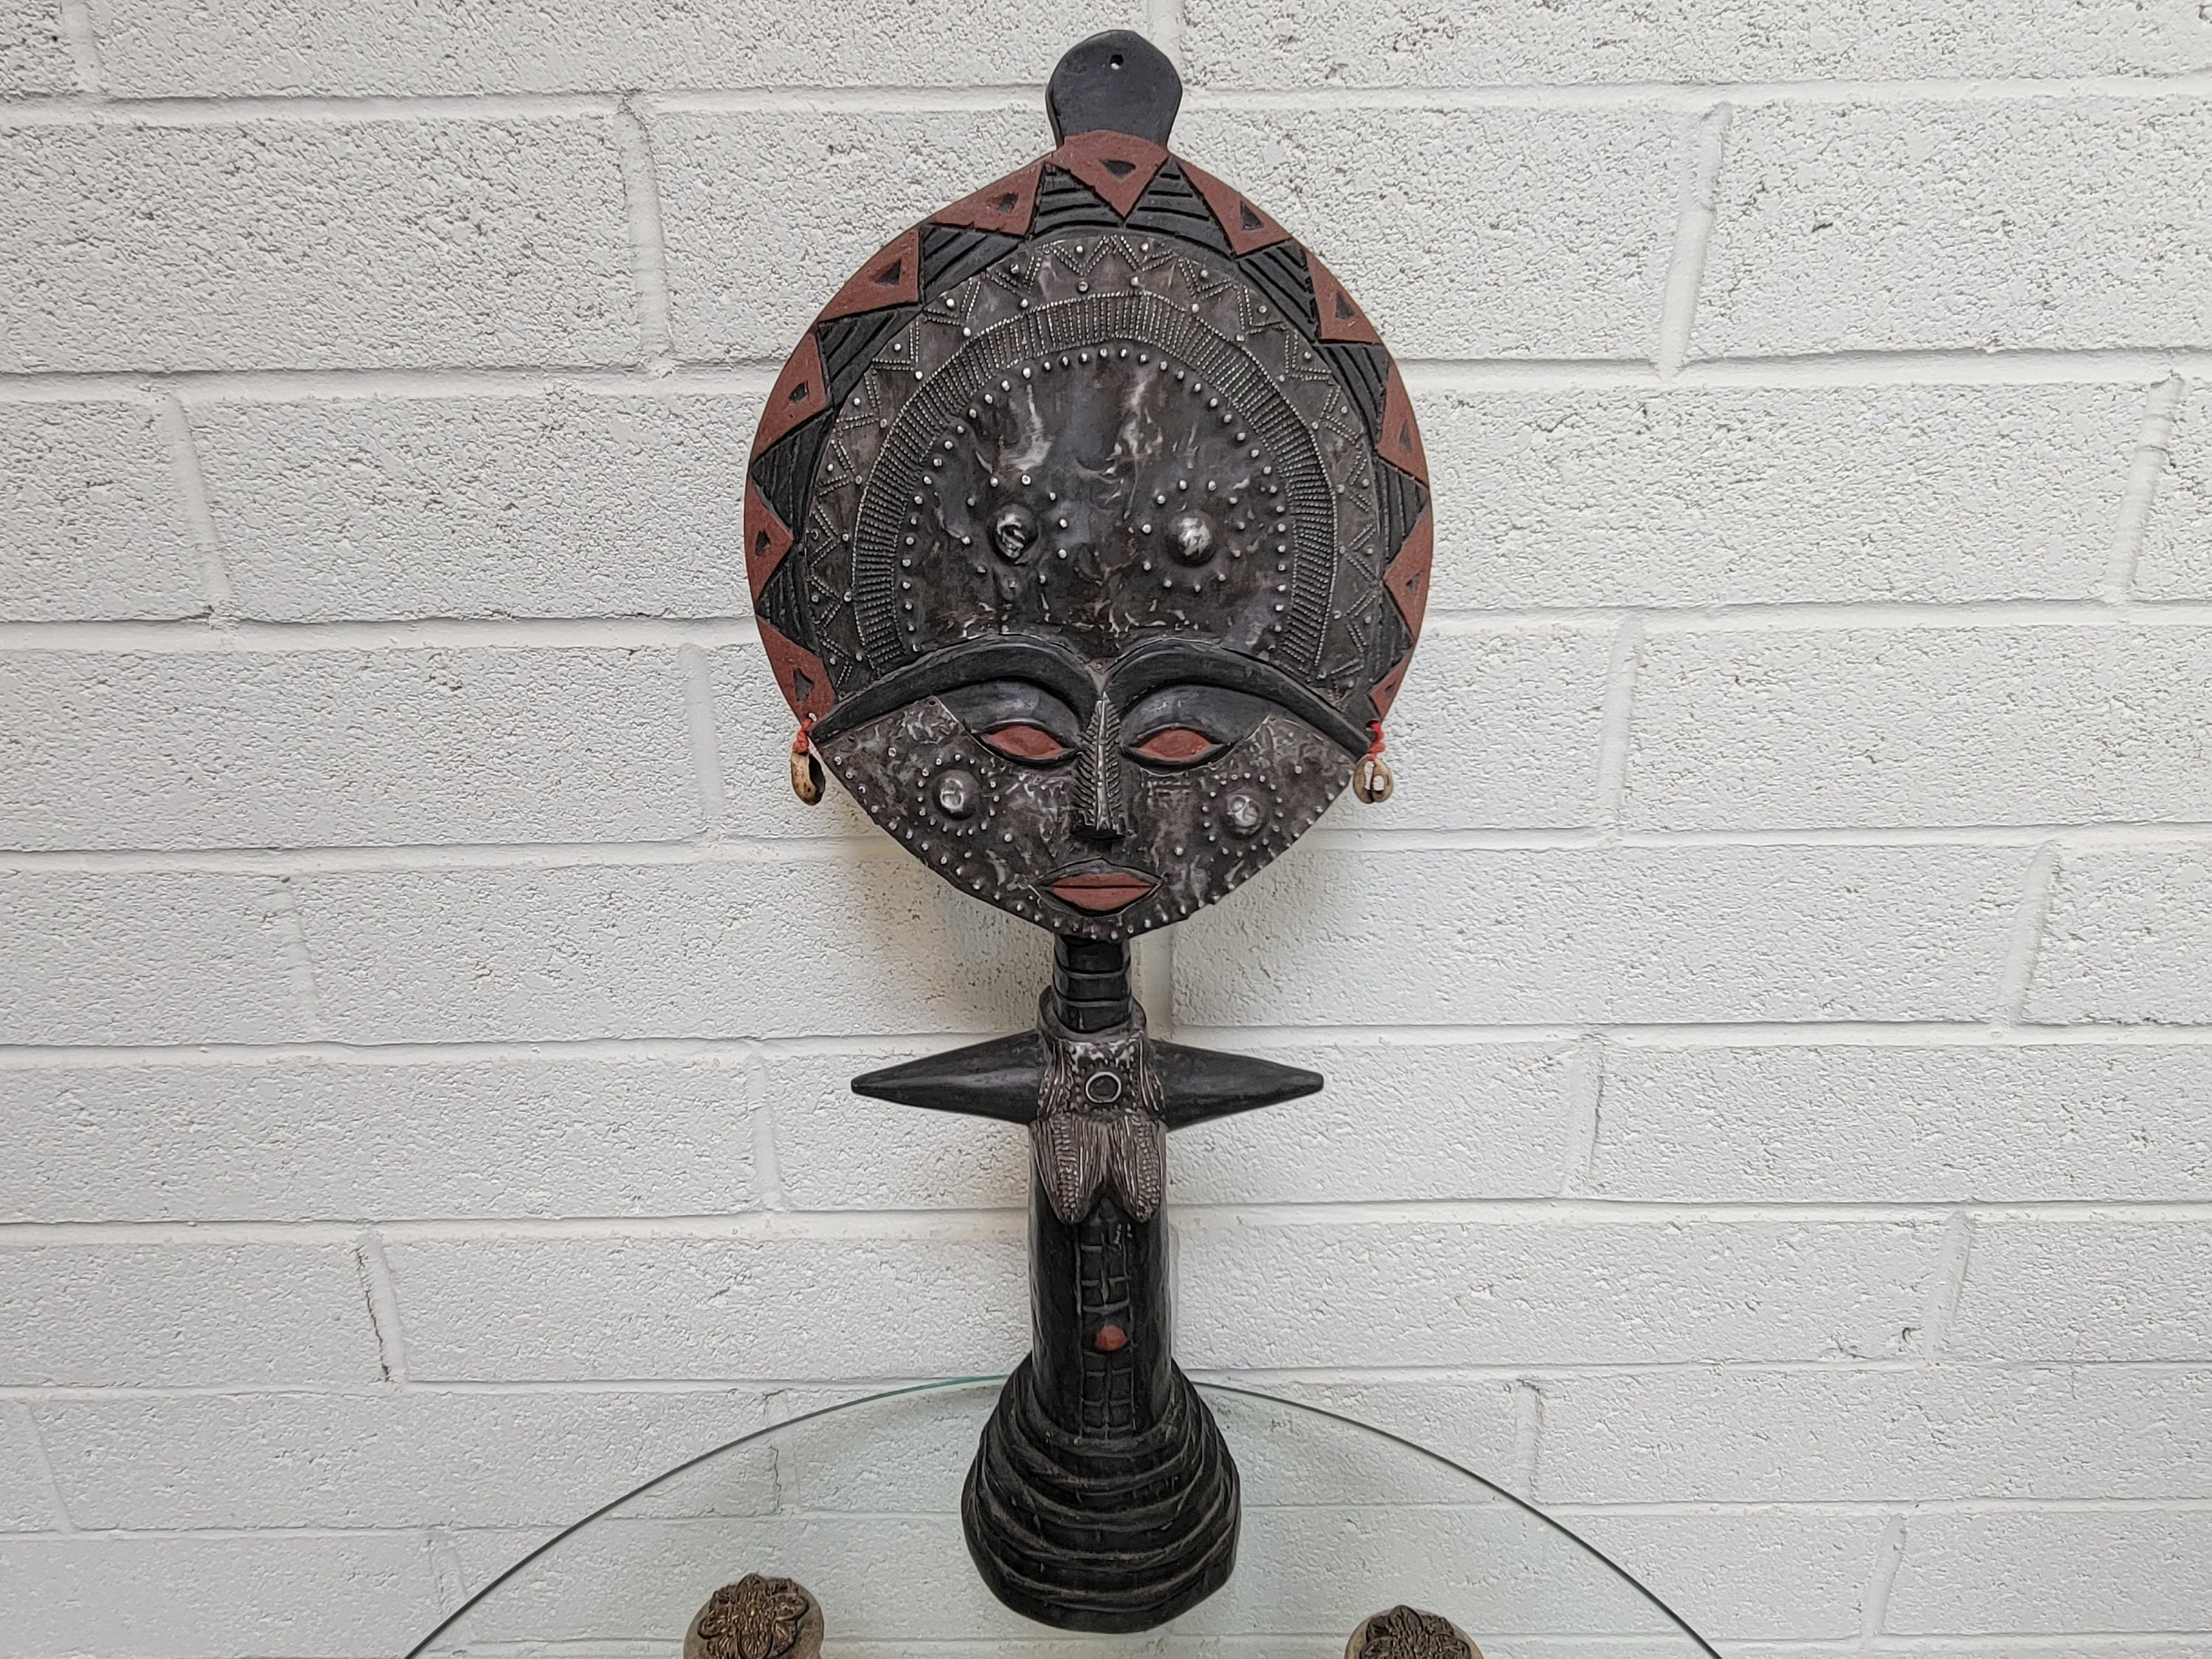 Carved African Folk Art Sculpture Metal and Wood Vintagesouthwest 23 Tall Hand Crafted Fertility Statue African Art